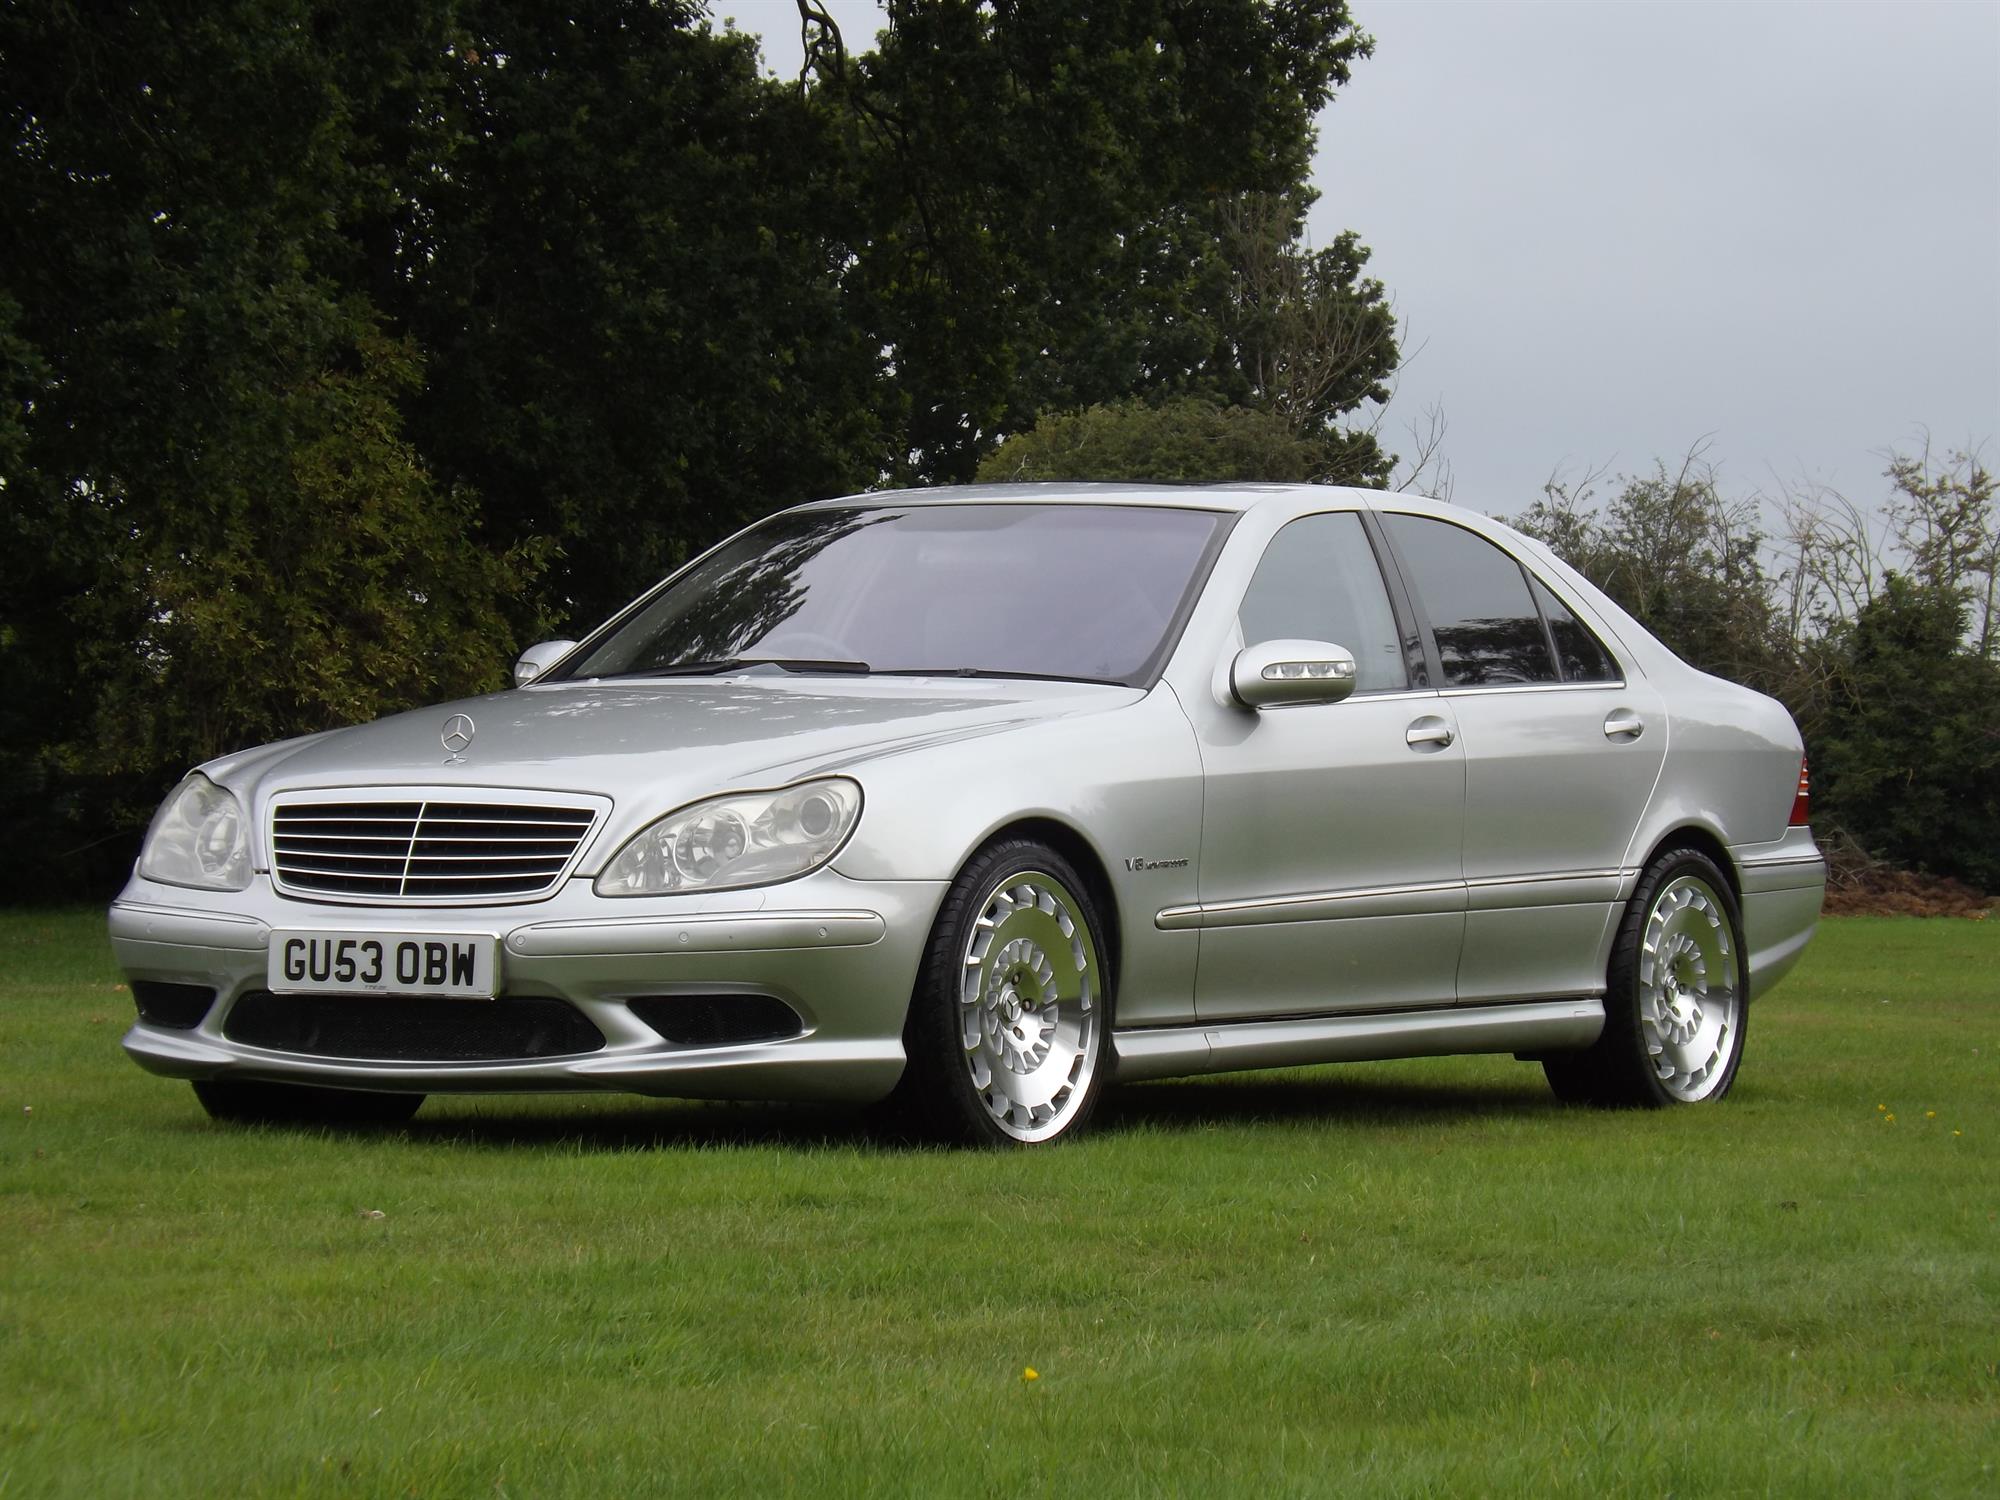 2003 Mercedes-Benz S55 AMG (W220) - Image 4 of 4